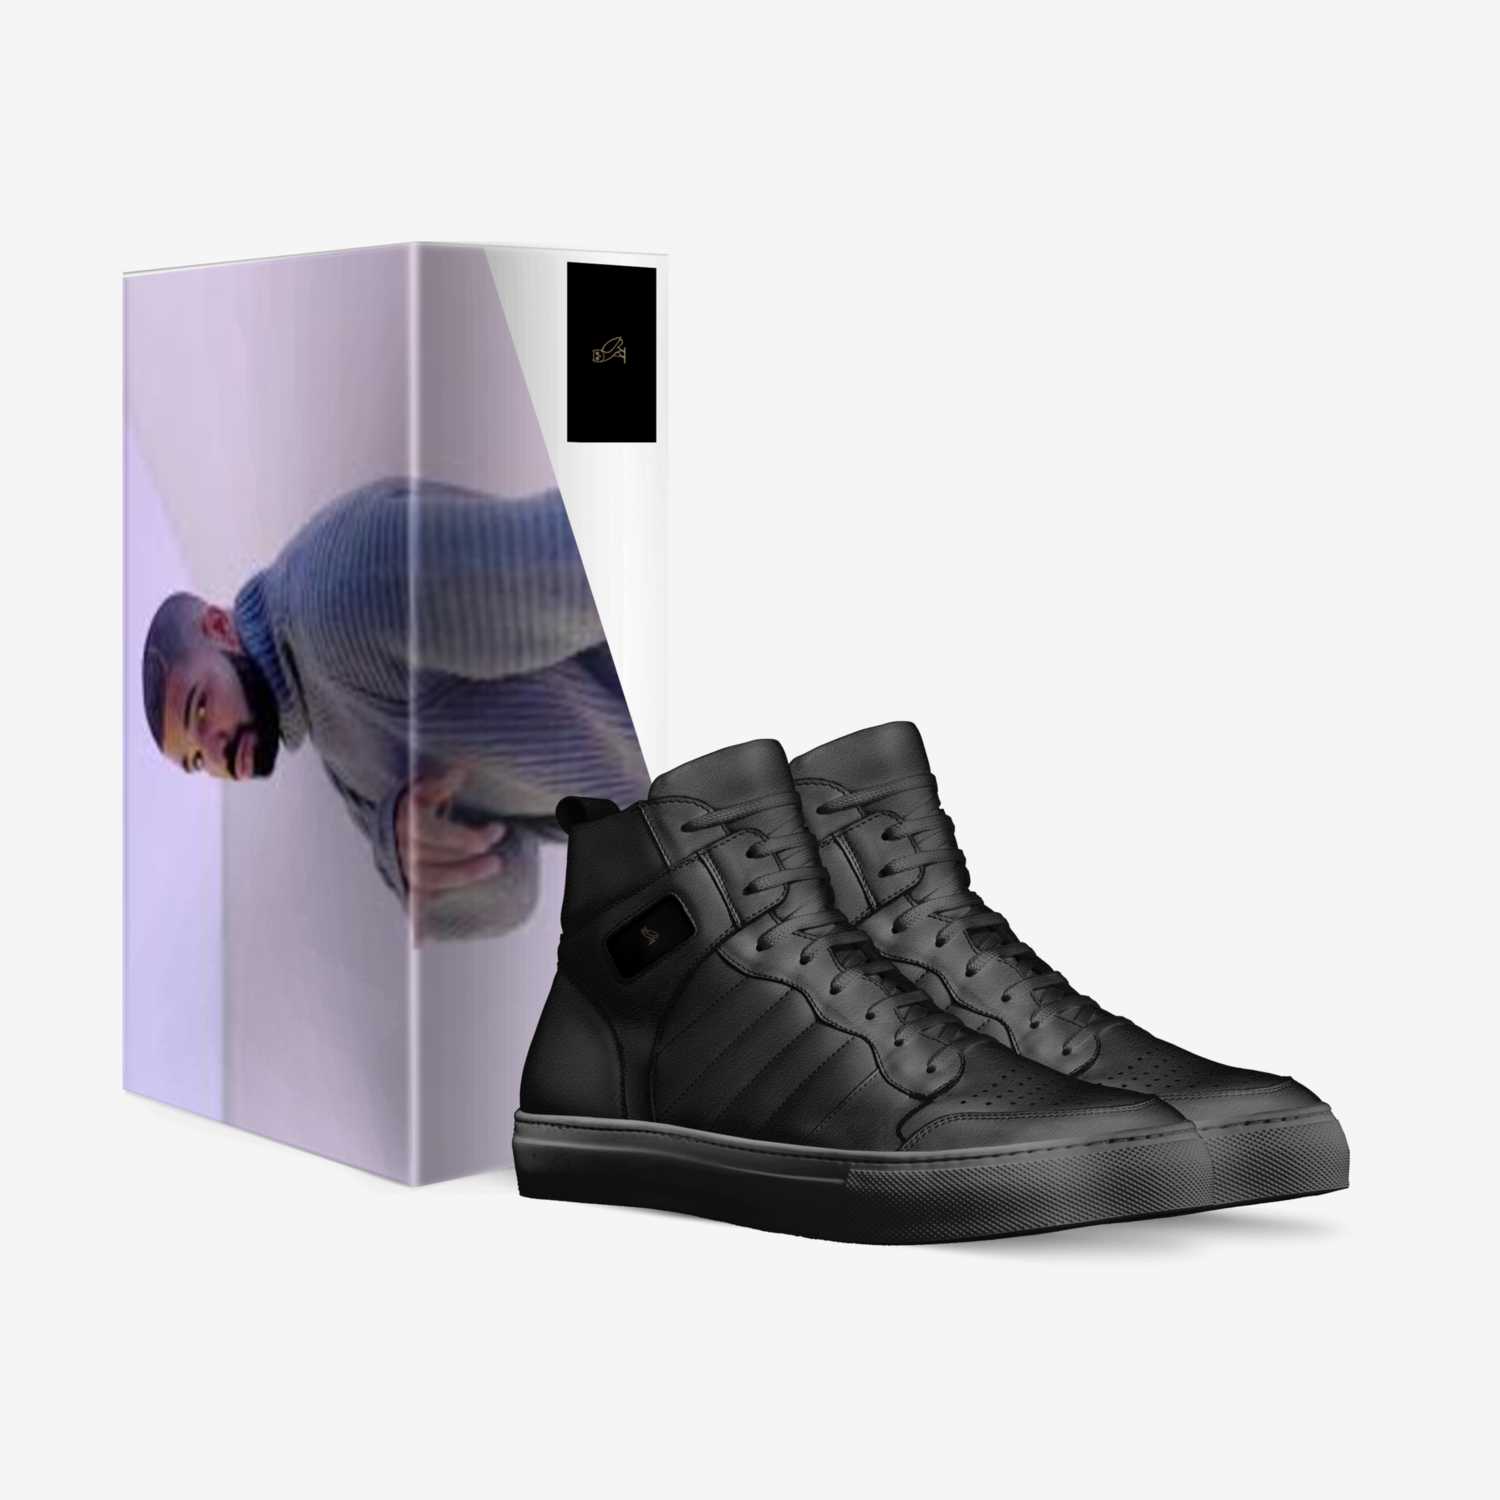 6lack custom made in Italy shoes by Yugi | Box view